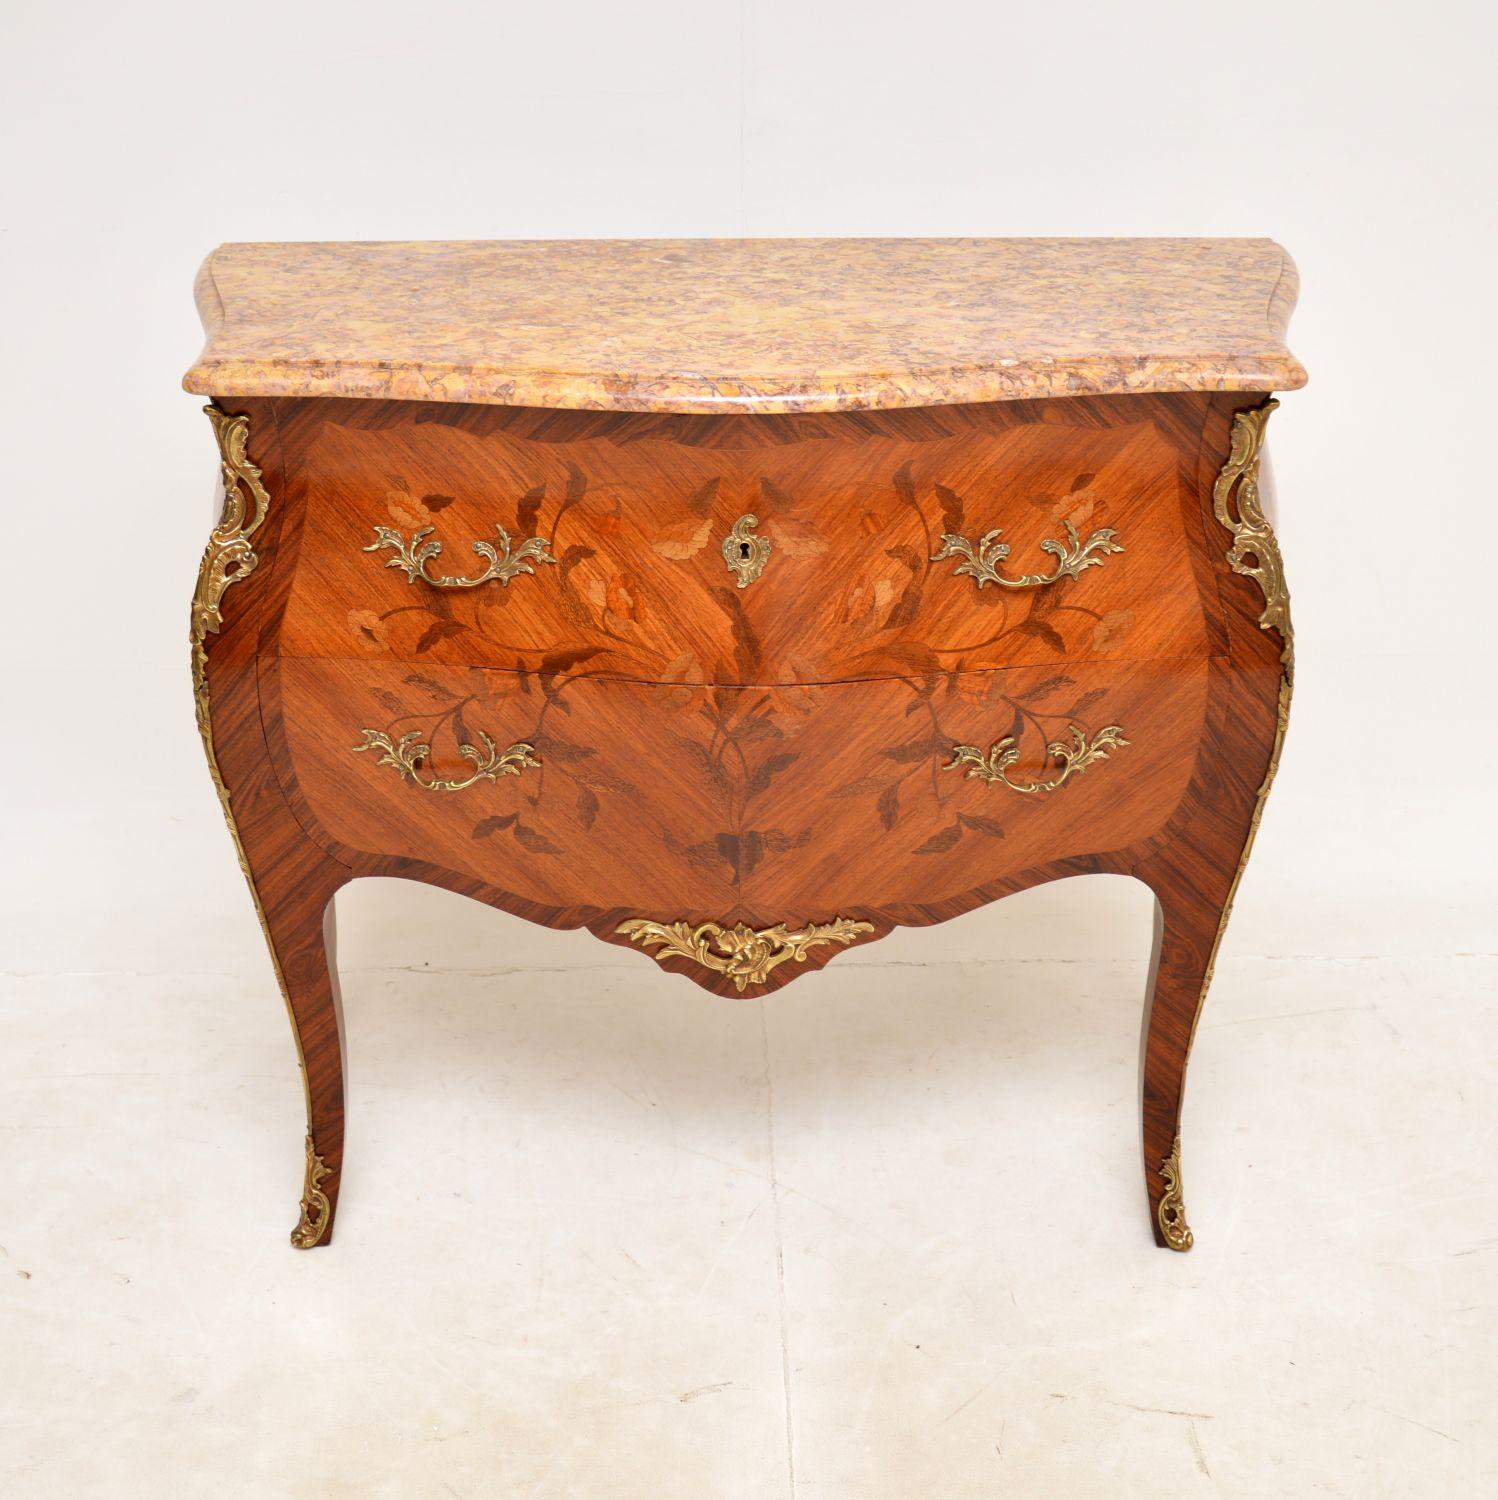 A stunning antique French marble top bombe commode with an amazing original marble top. This was made in France and dates from around the 1890-1900 period.

It is of superb quality and is made from various woods inlaid into gorgeous patterns. The